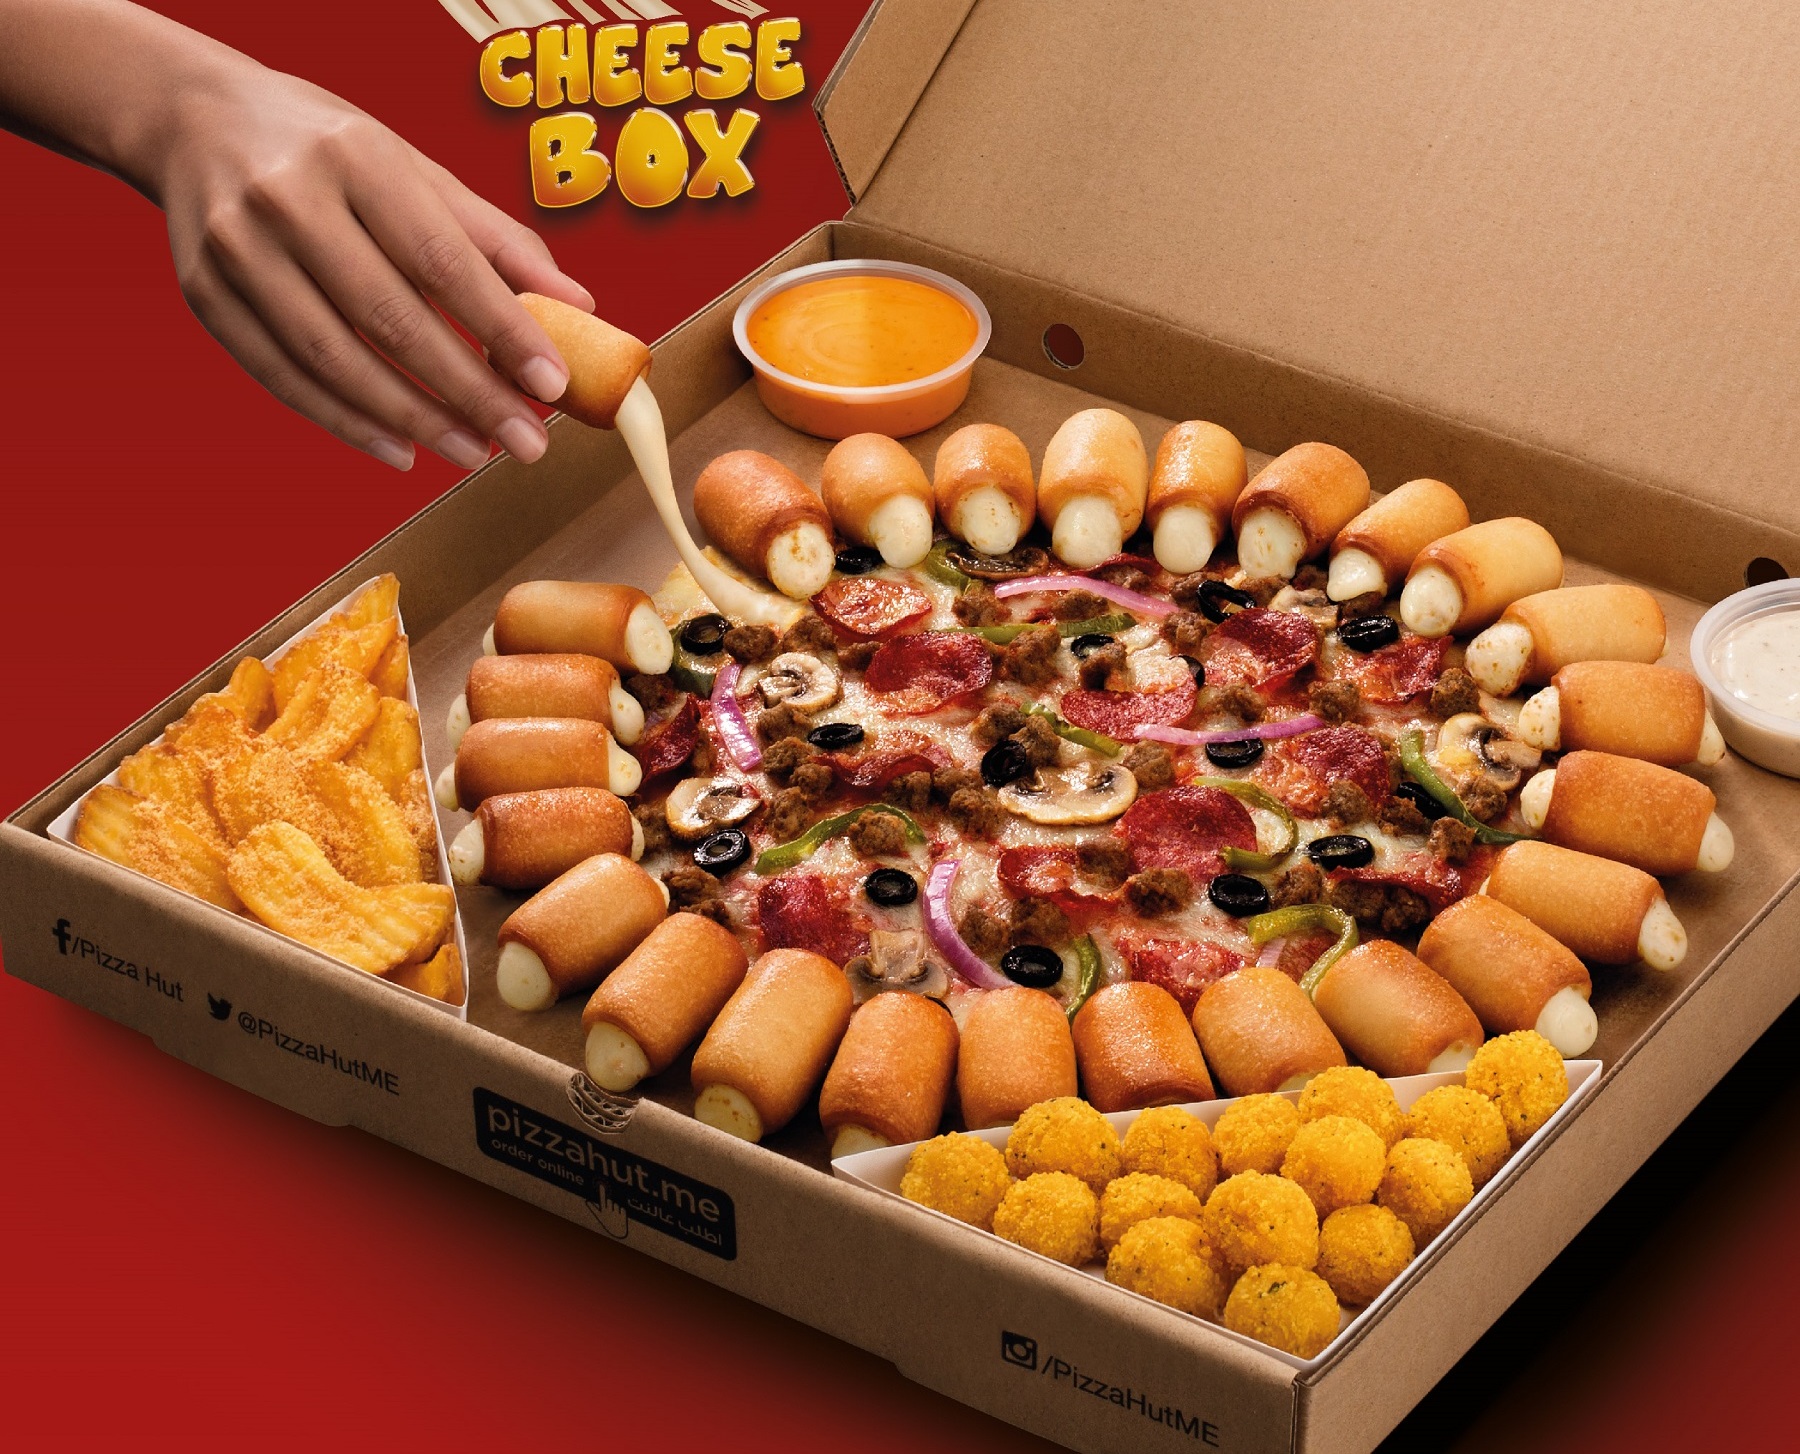 Pizza Hut introduces exclusive Big Cheese Box offer